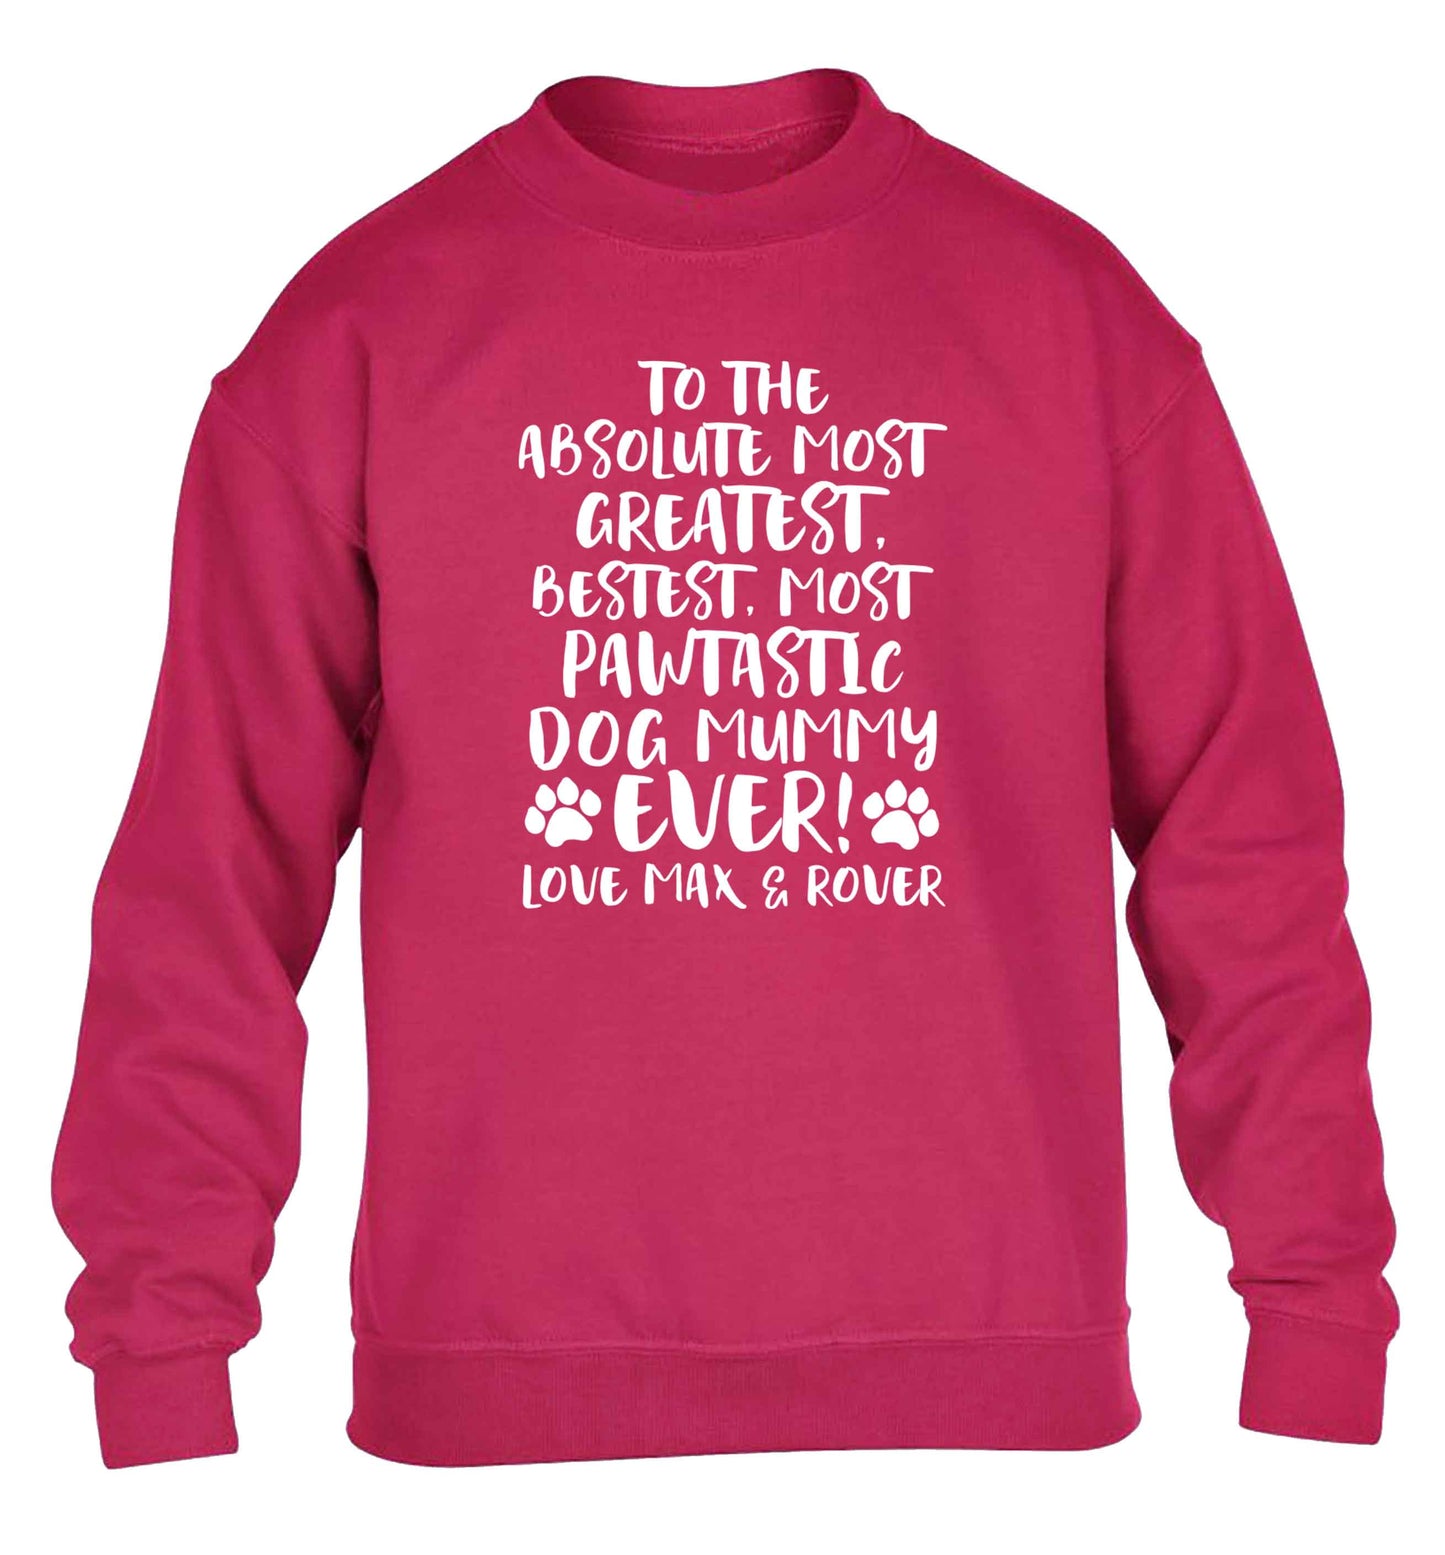 Personalsied to the most pawtastic dog mummy ever children's pink sweater 12-13 Years